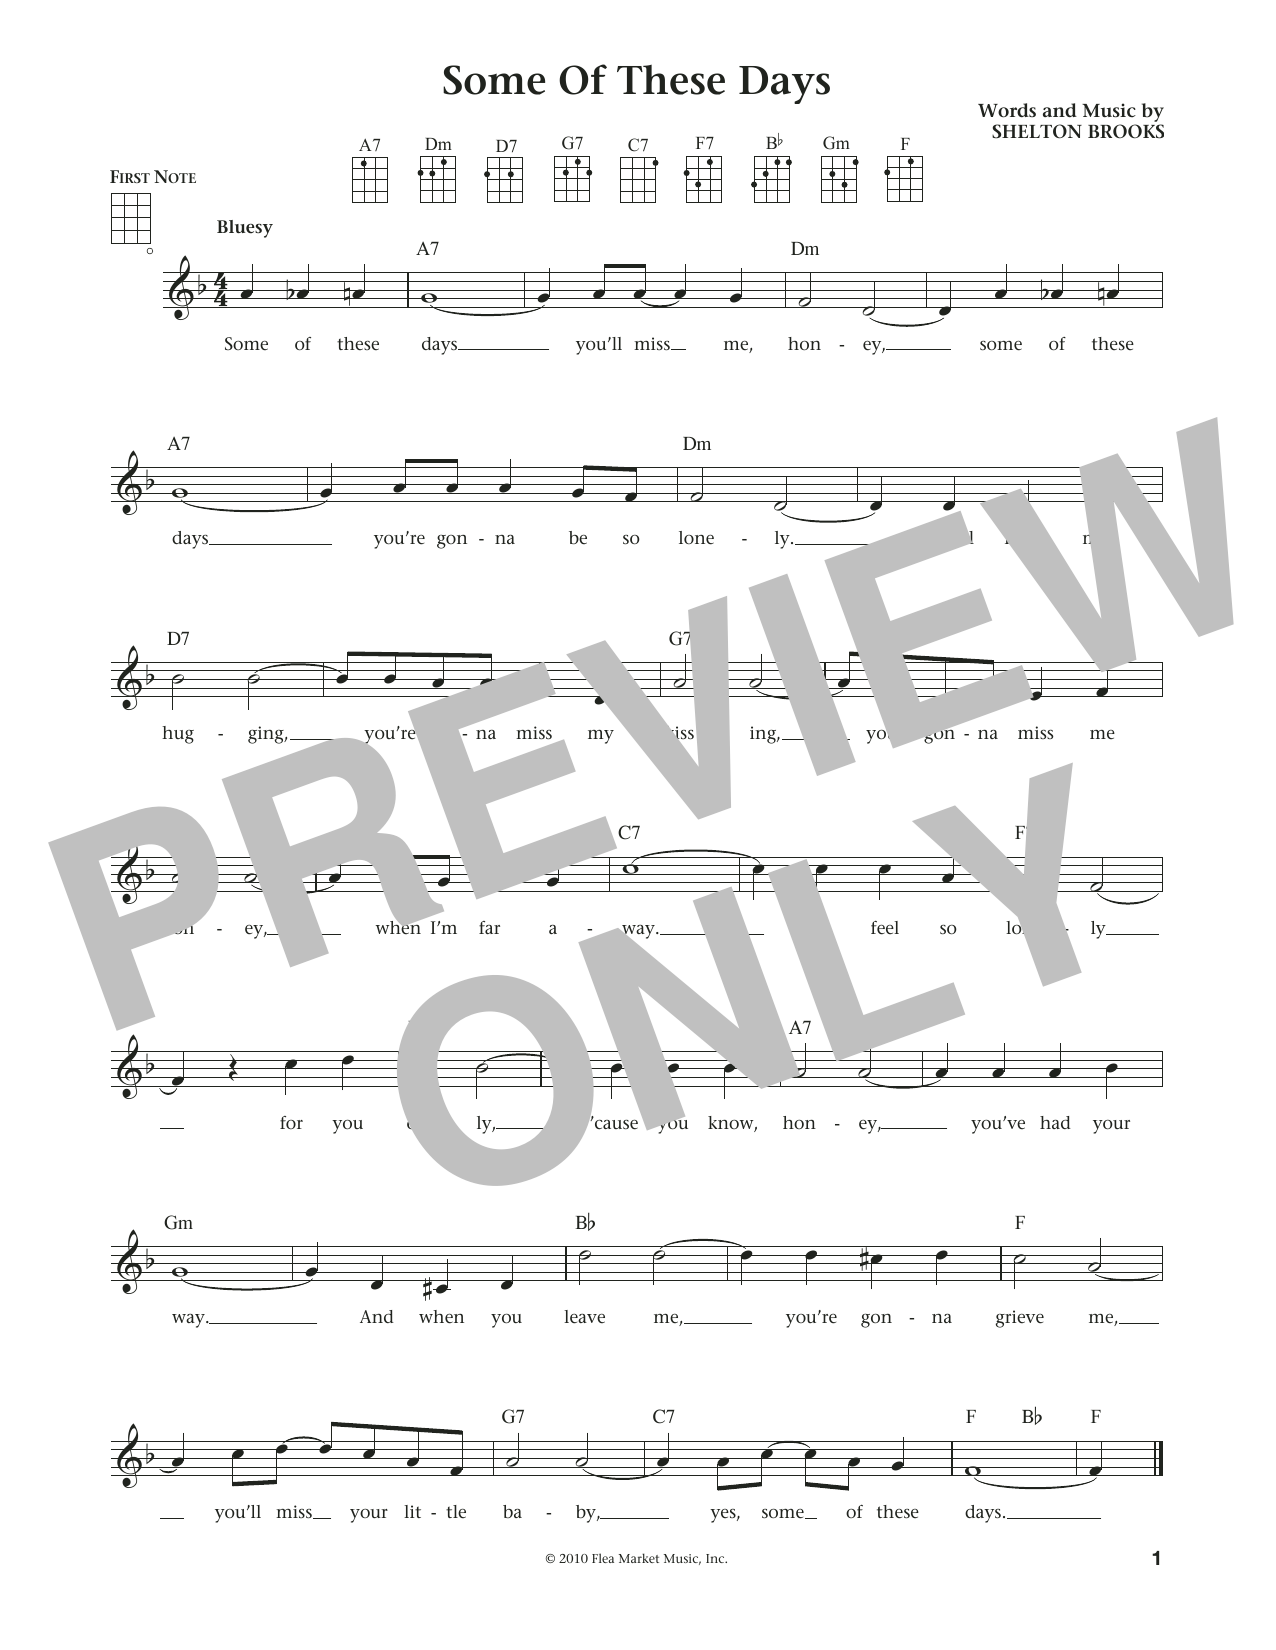 Download Shelton Brooks Some Of These Days (from The Daily Ukul Sheet Music